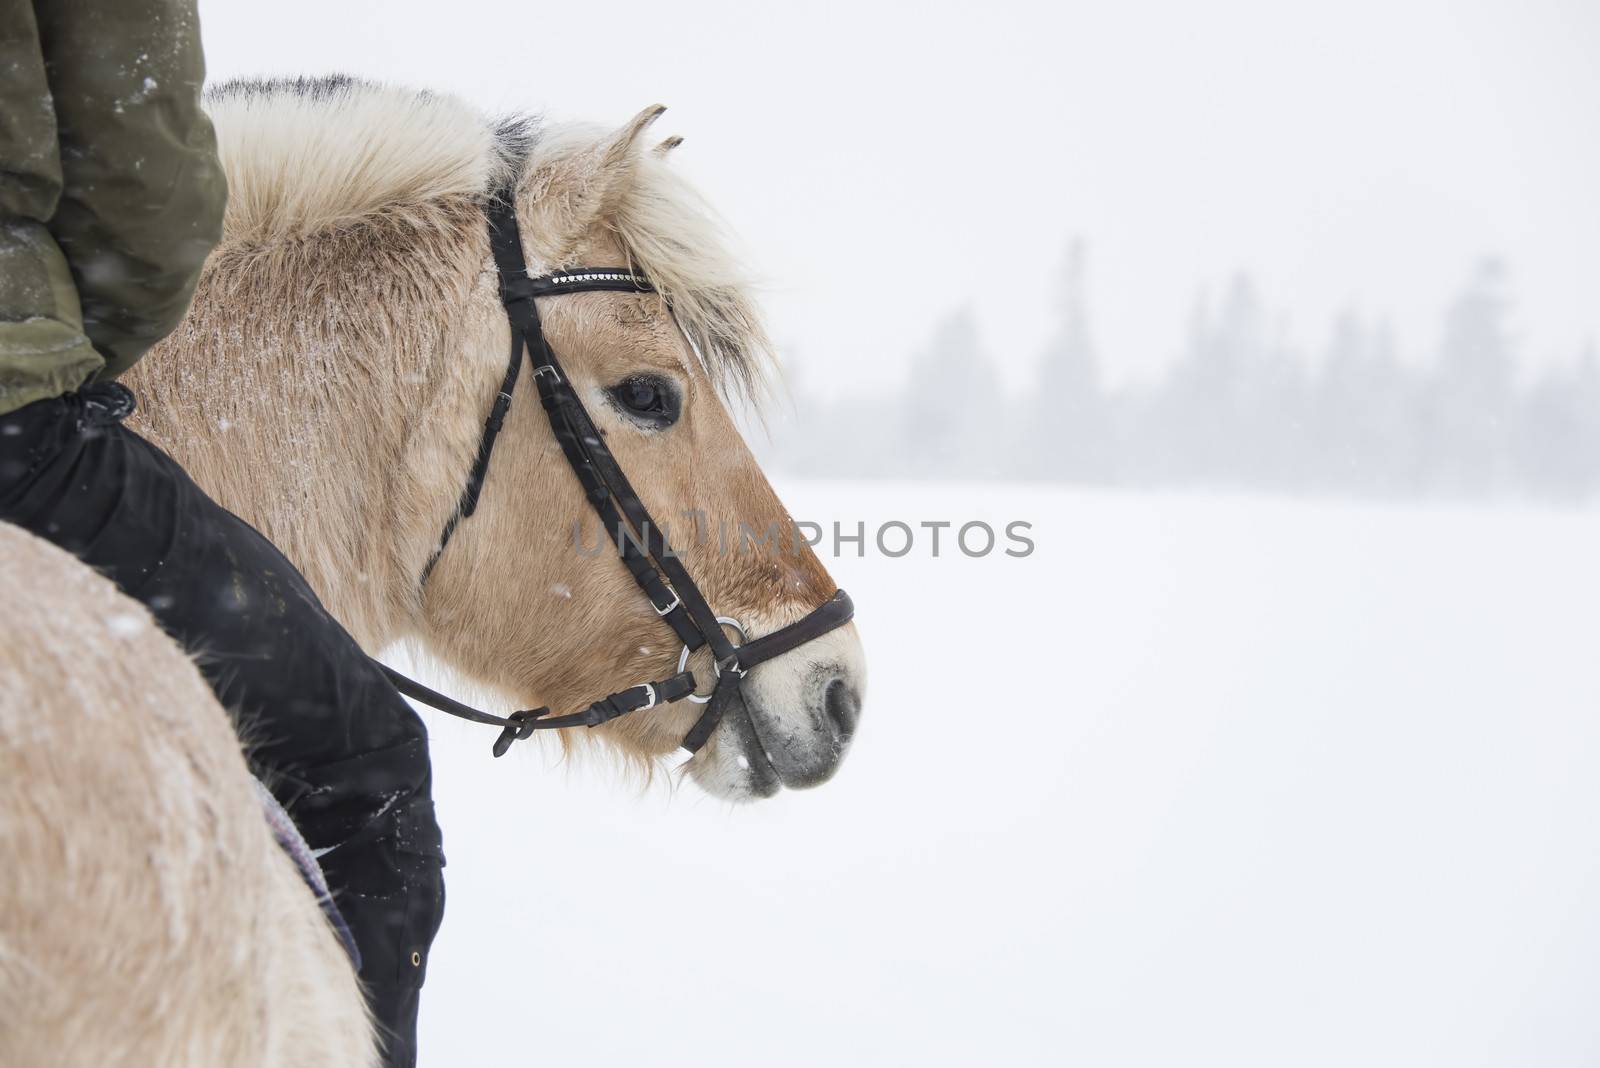 A person is riding a horse in a winter landscape.  Seen from behind. Snowflakes visible.